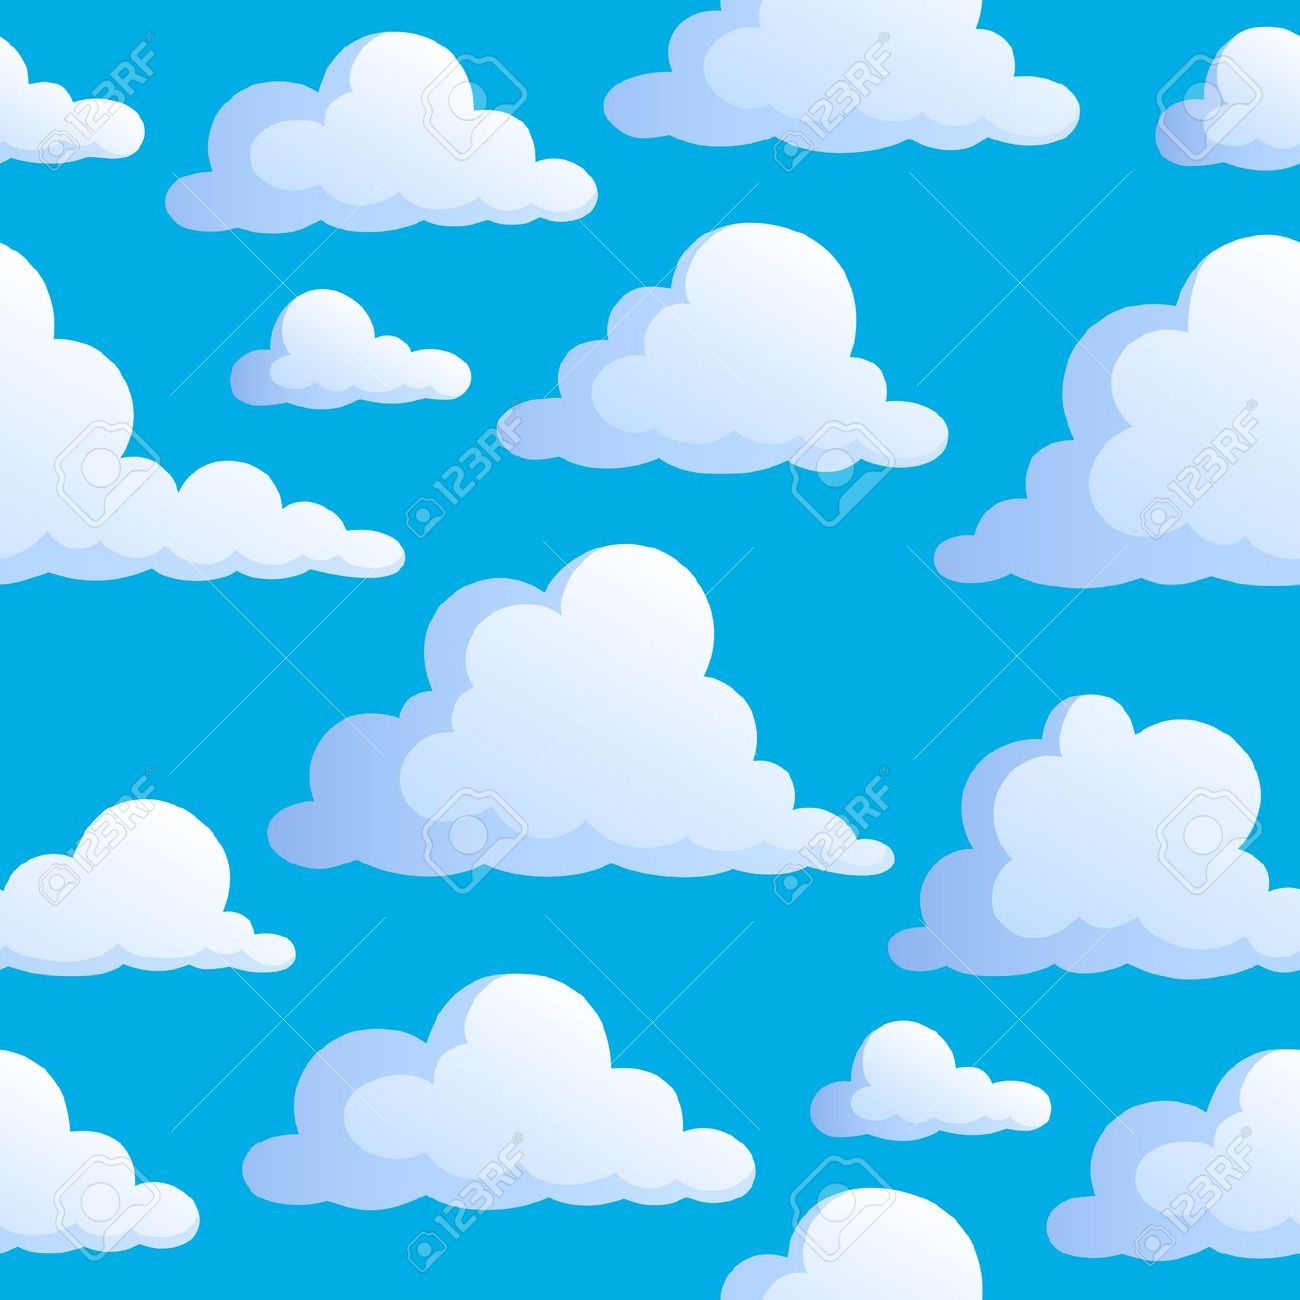 Background clouds clipart - Clipground